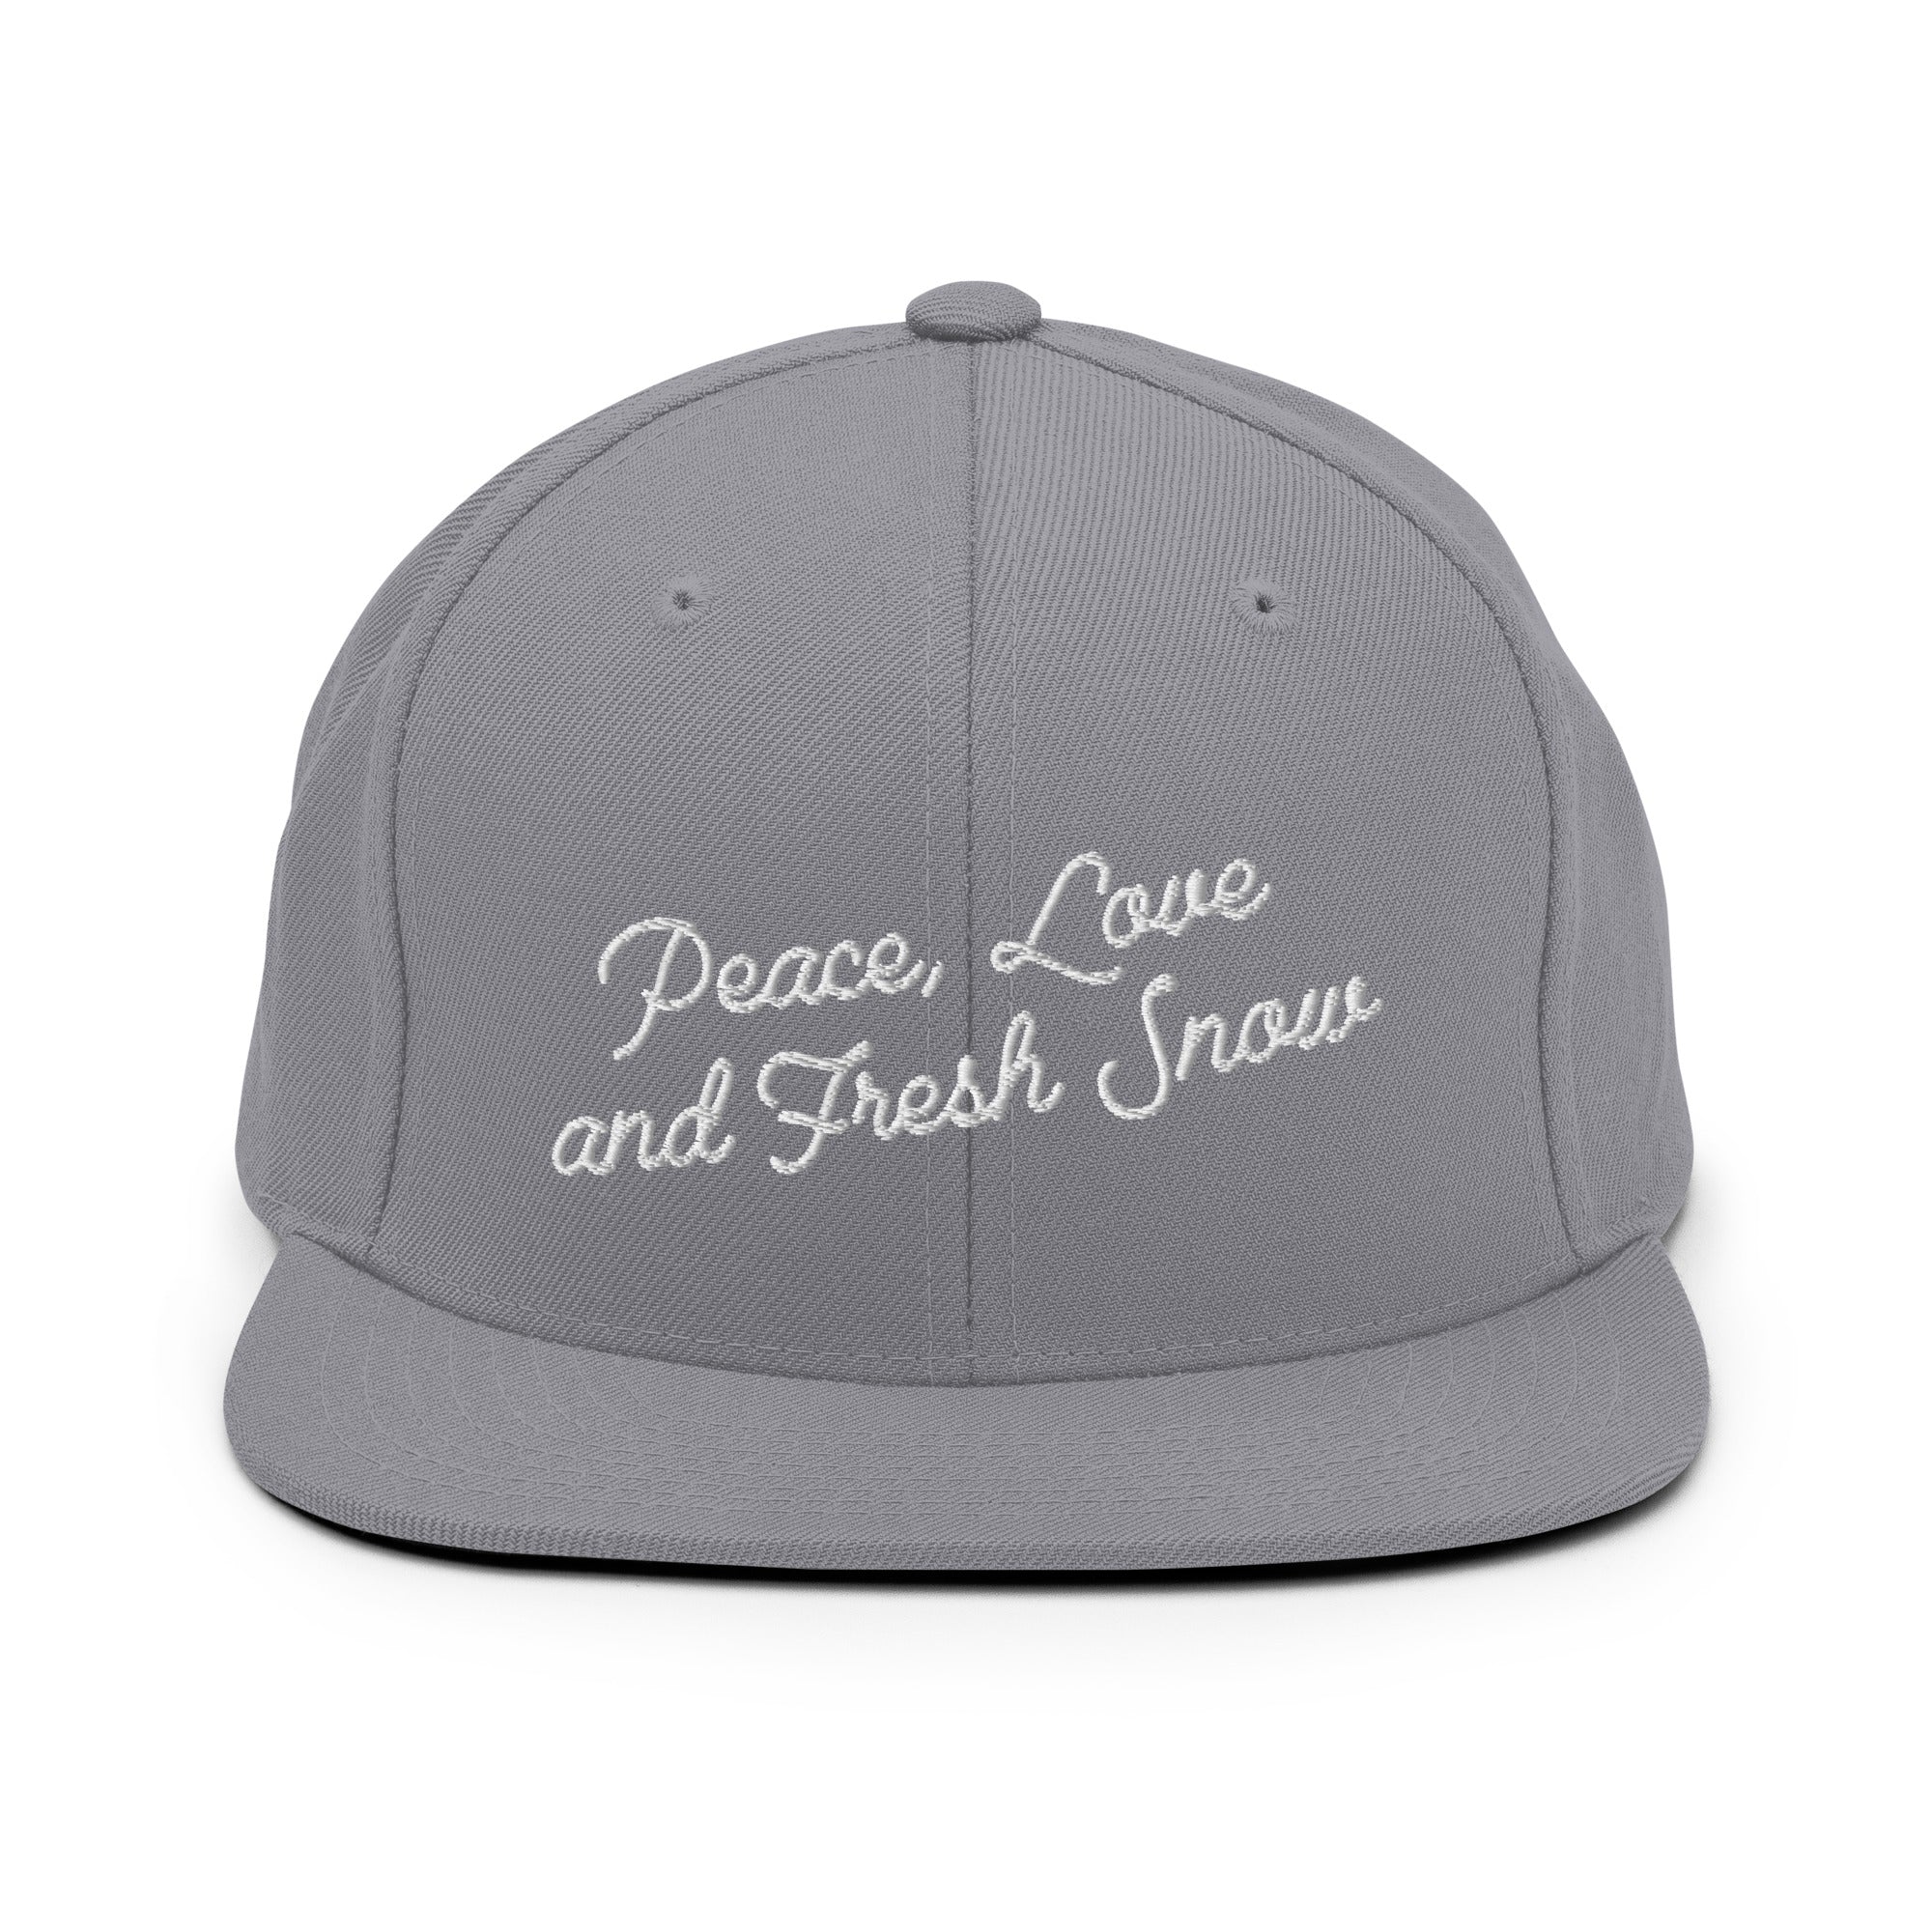 Casquette Snapback Wool Blend Peace, Love and Fresh Snow White letters